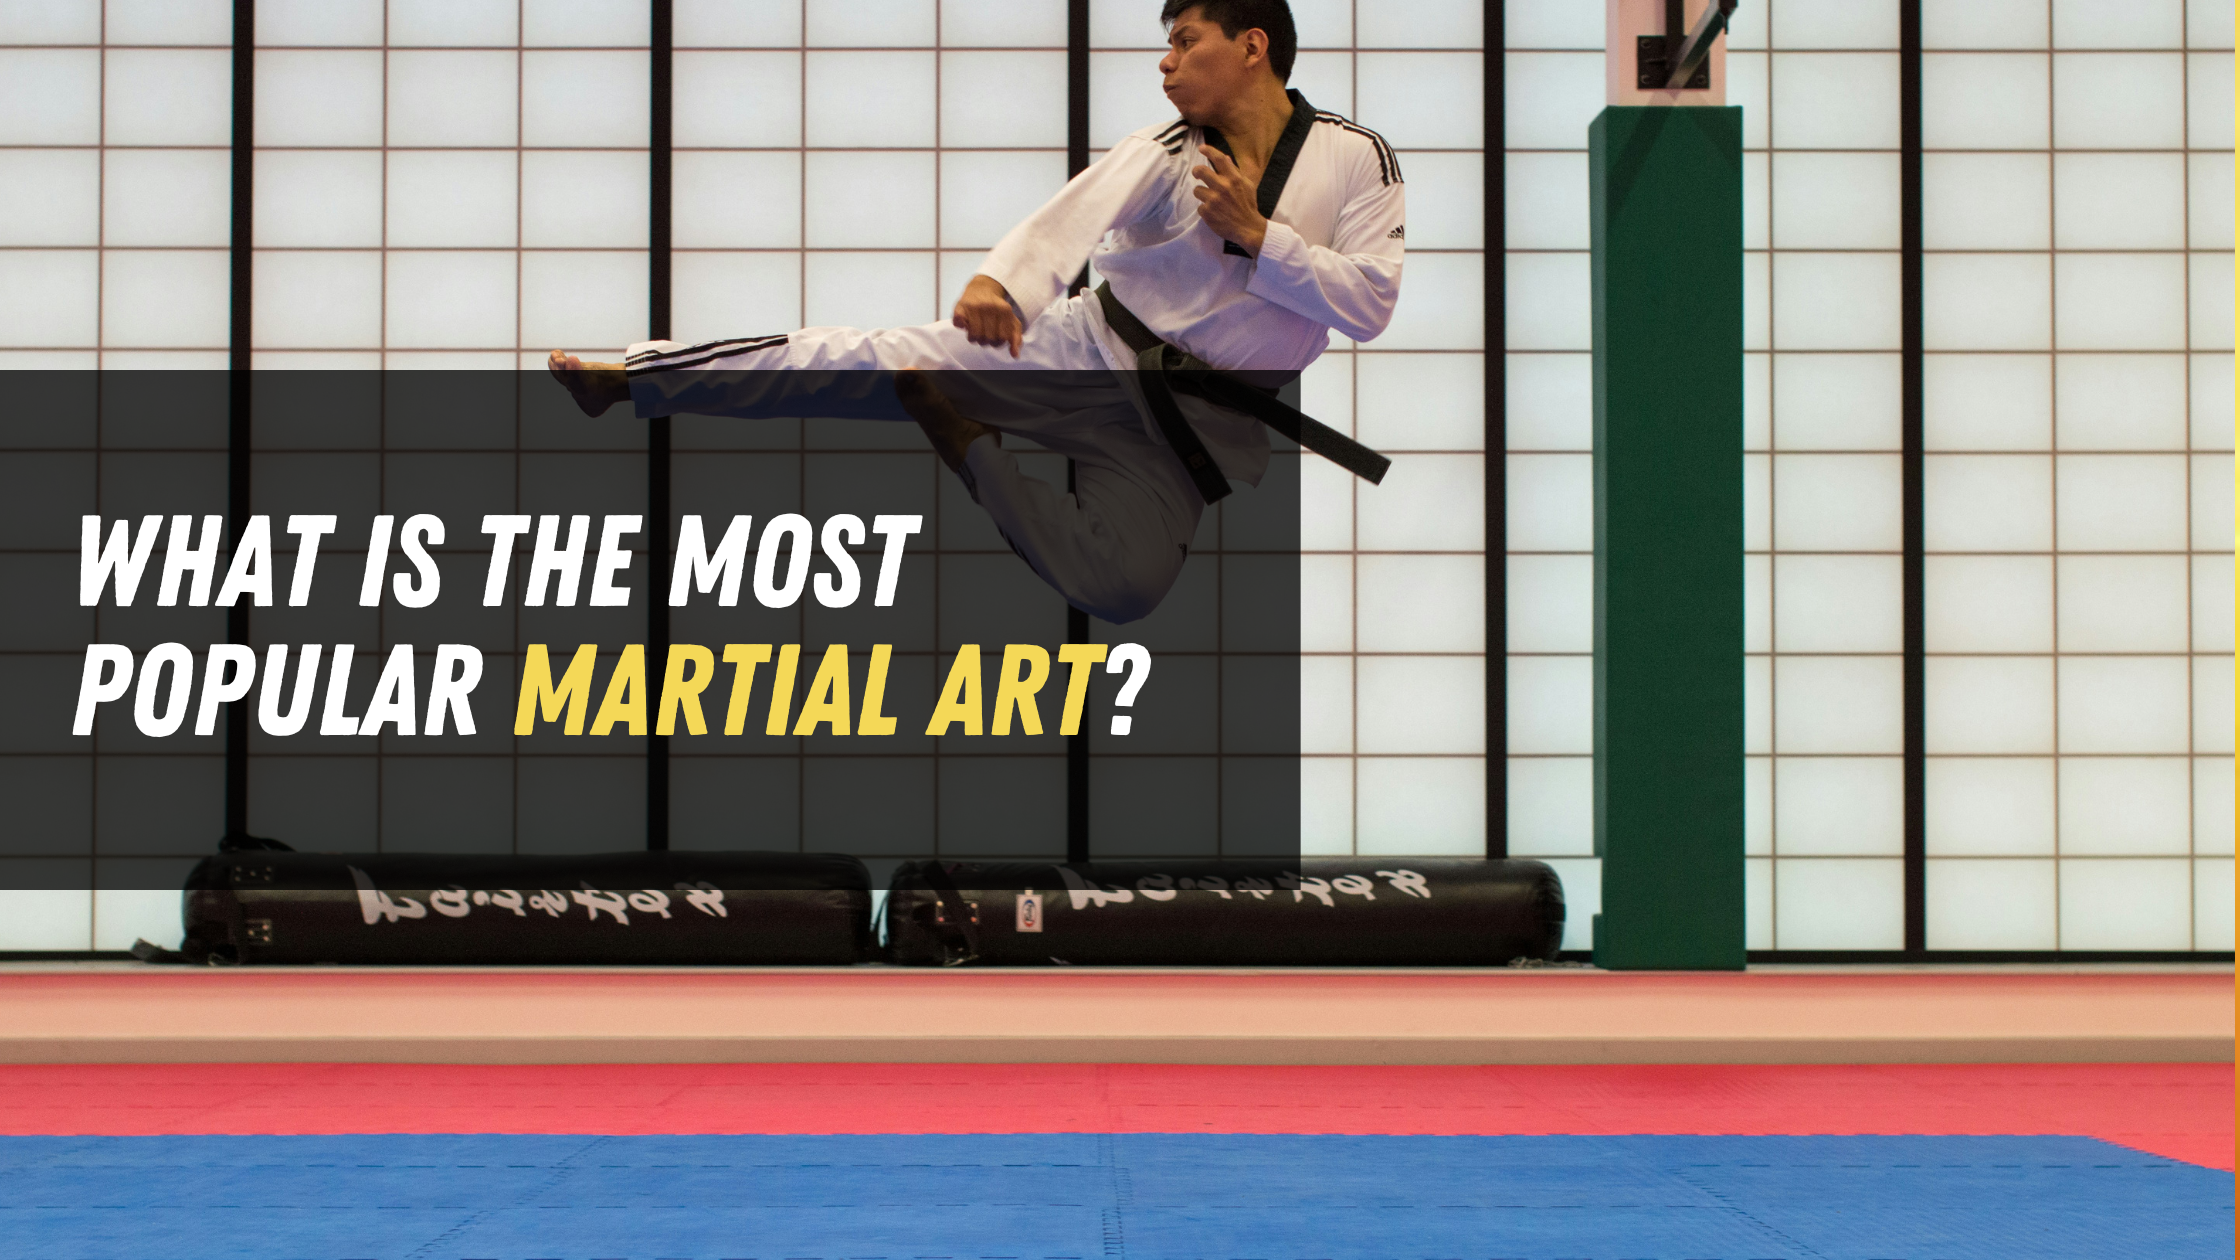 What Is the Most Popular Martial Art?